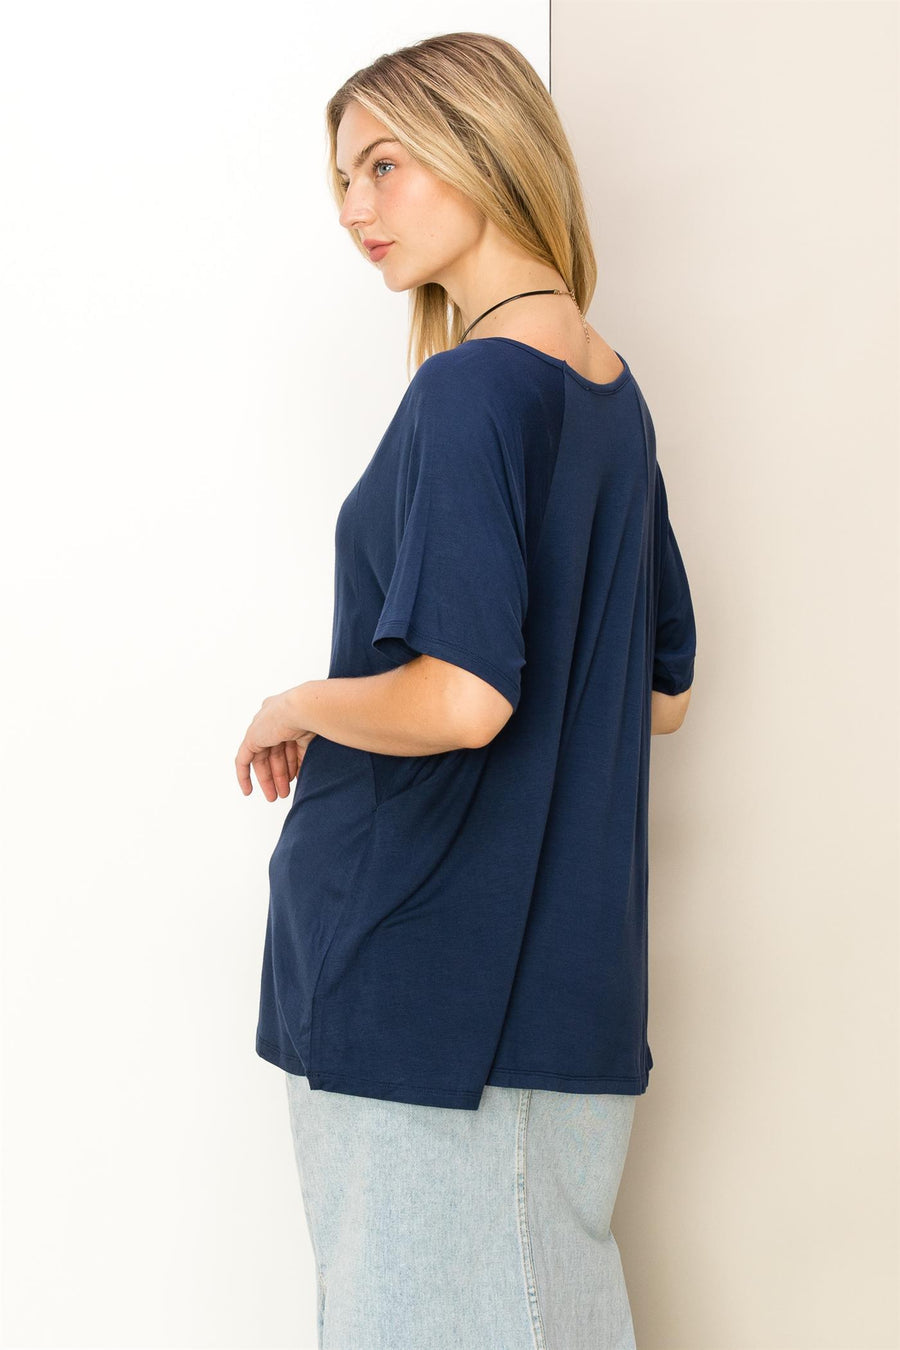 A woman standing against a wall wearing a HYFVE Oversized Short Sleeve Top in blue.